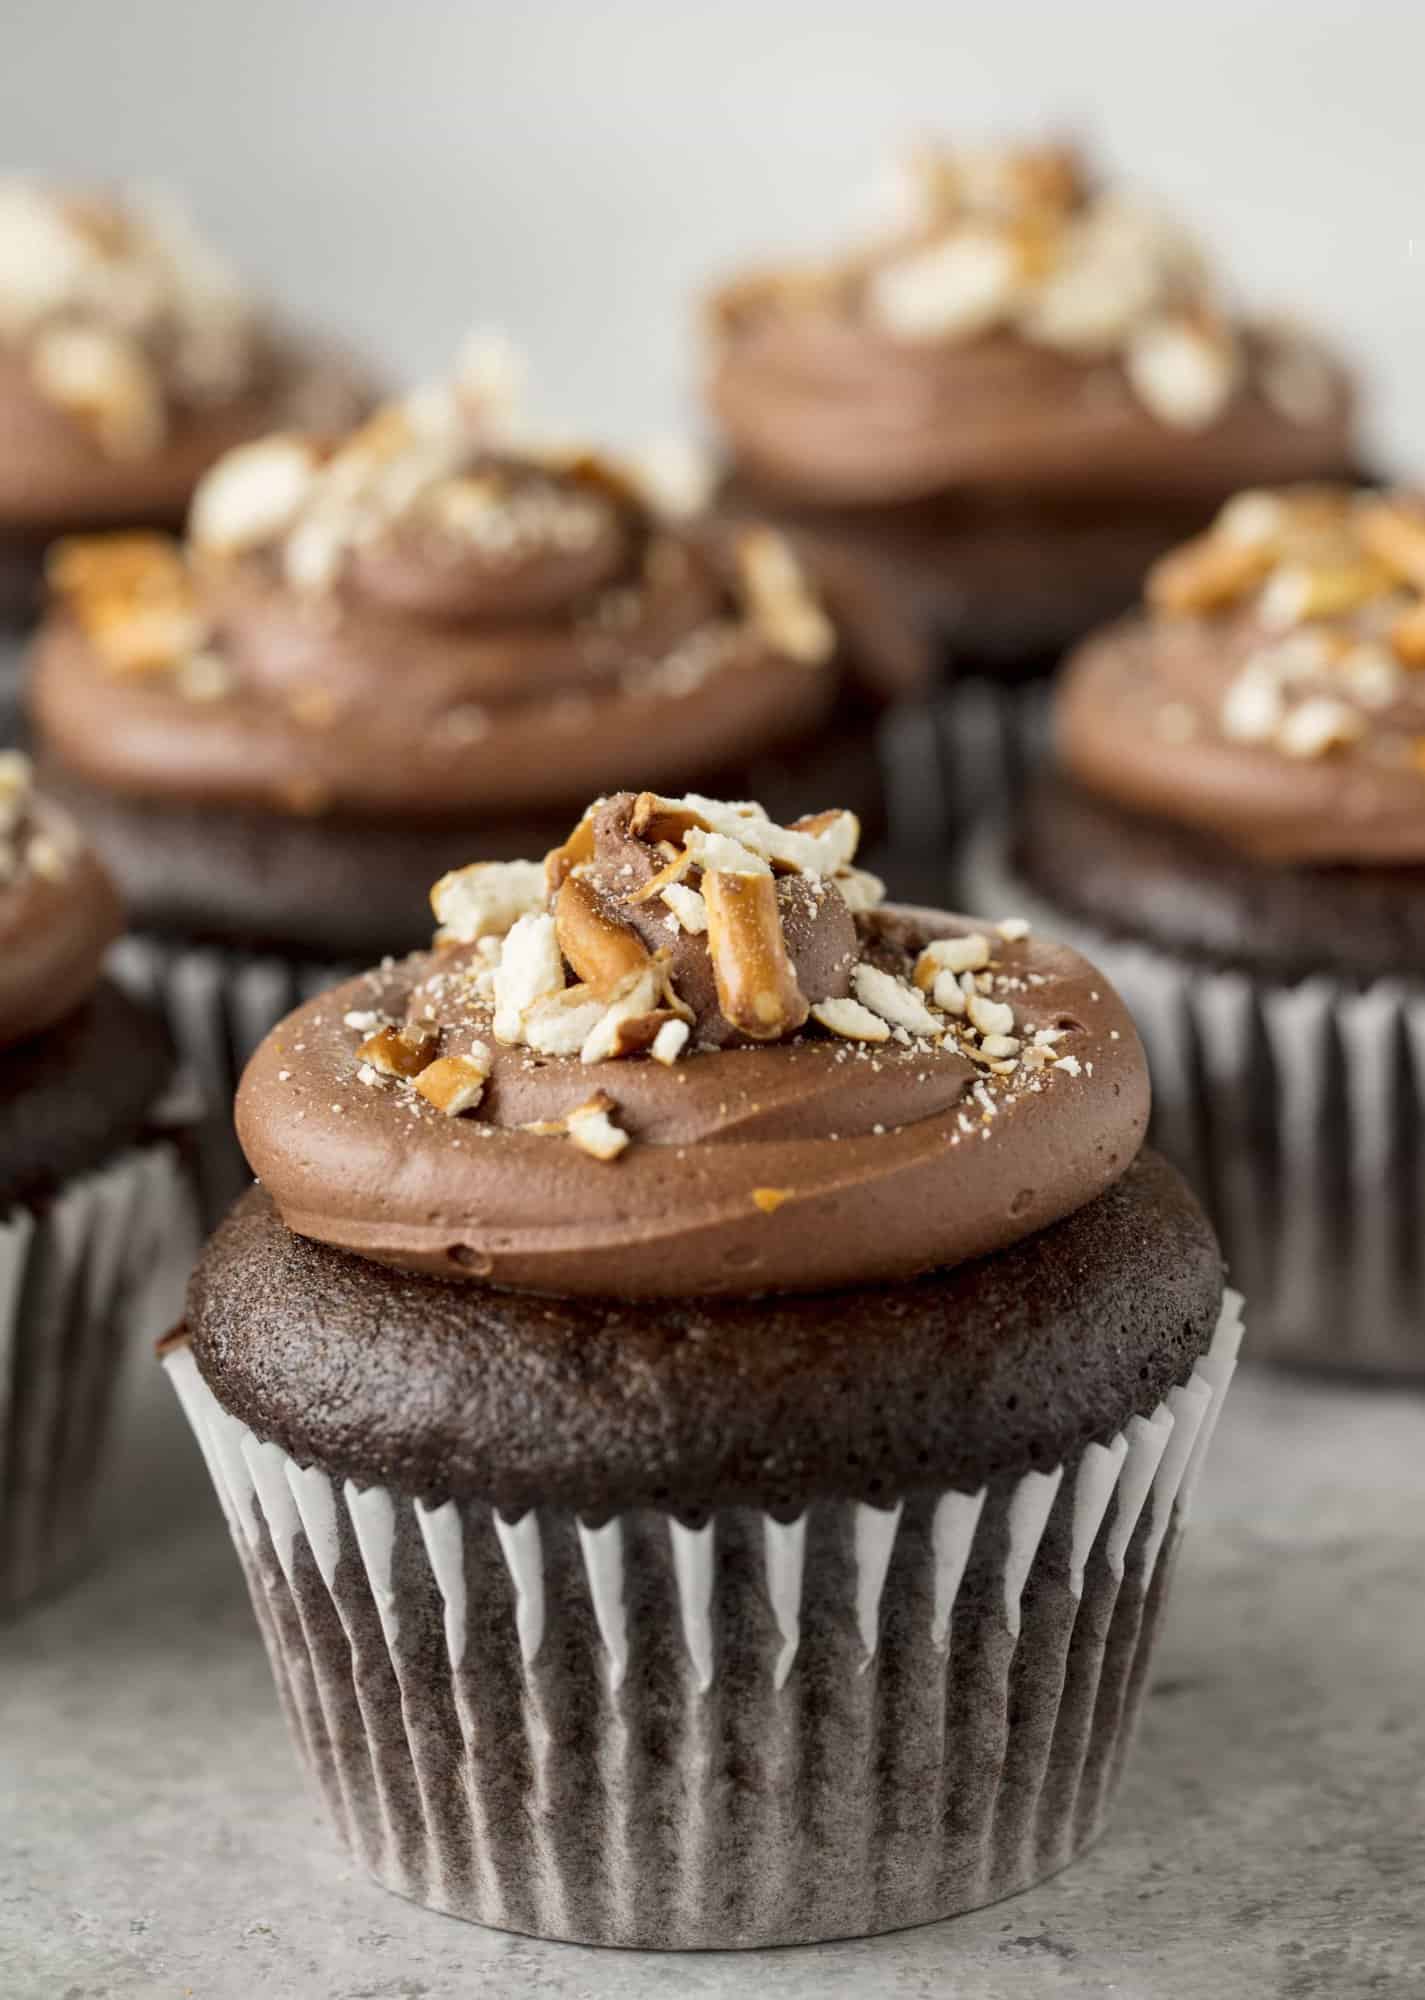 Sinfully decadent chocolate cupcakes filled with a creamy peanut butter filling and topped with whipped chocolate ganache and crushed pretzel. These Chocolate Peanut Butter Pretzel Cupcakes are out of this world!